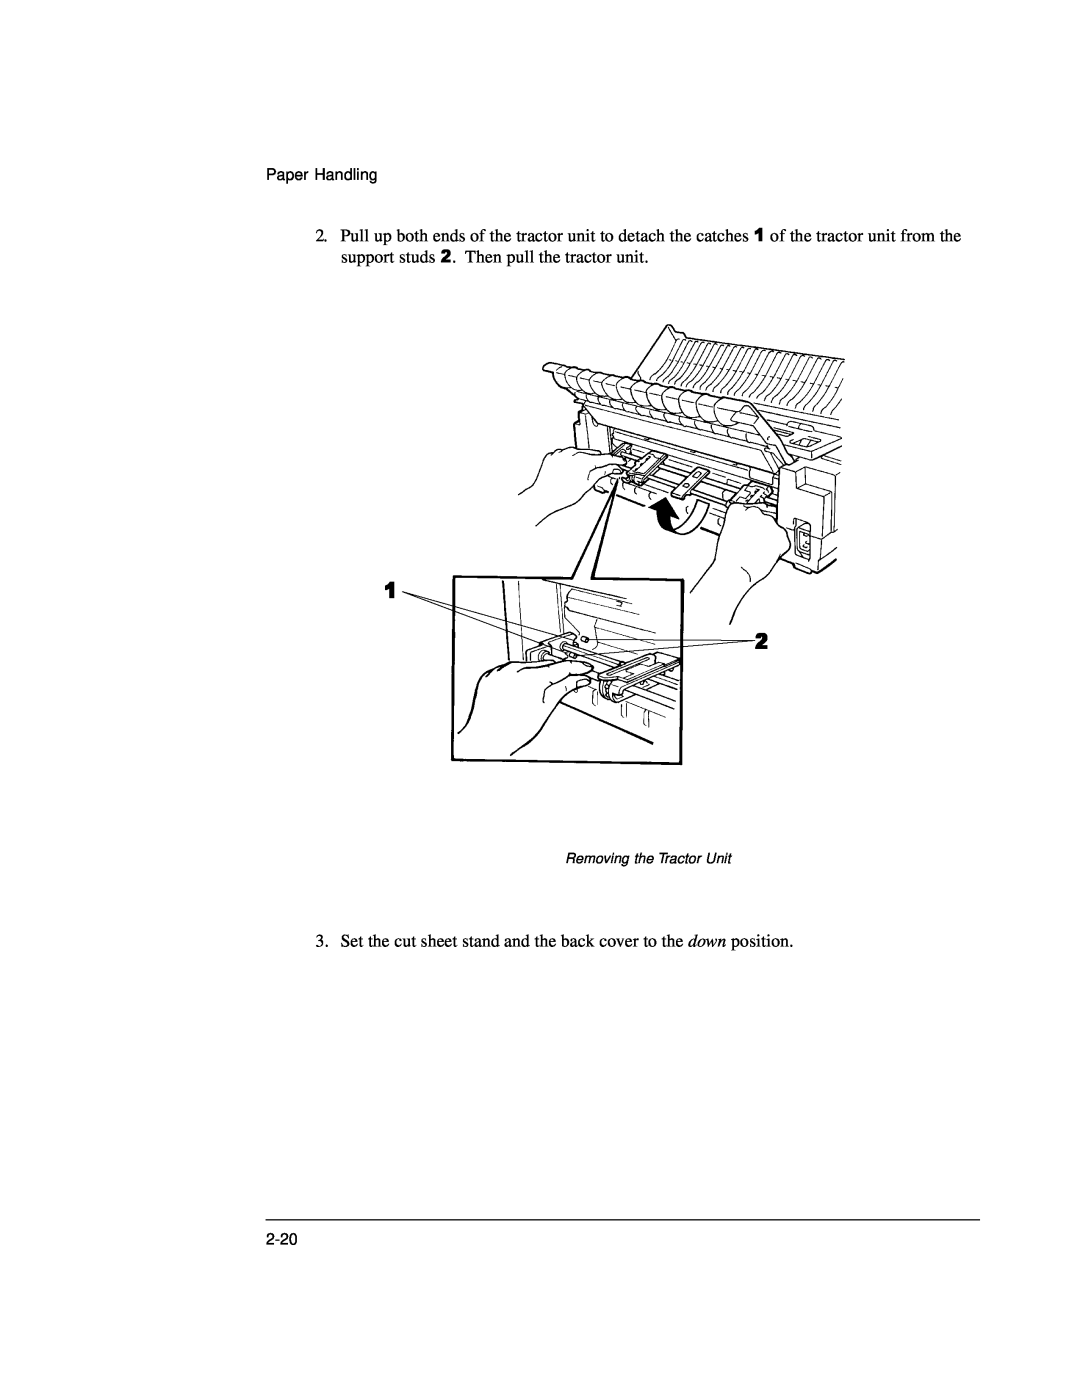 Genicom LA36 manual Set the cut sheet stand and the back cover to the down position, Removing the Tractor Unit 